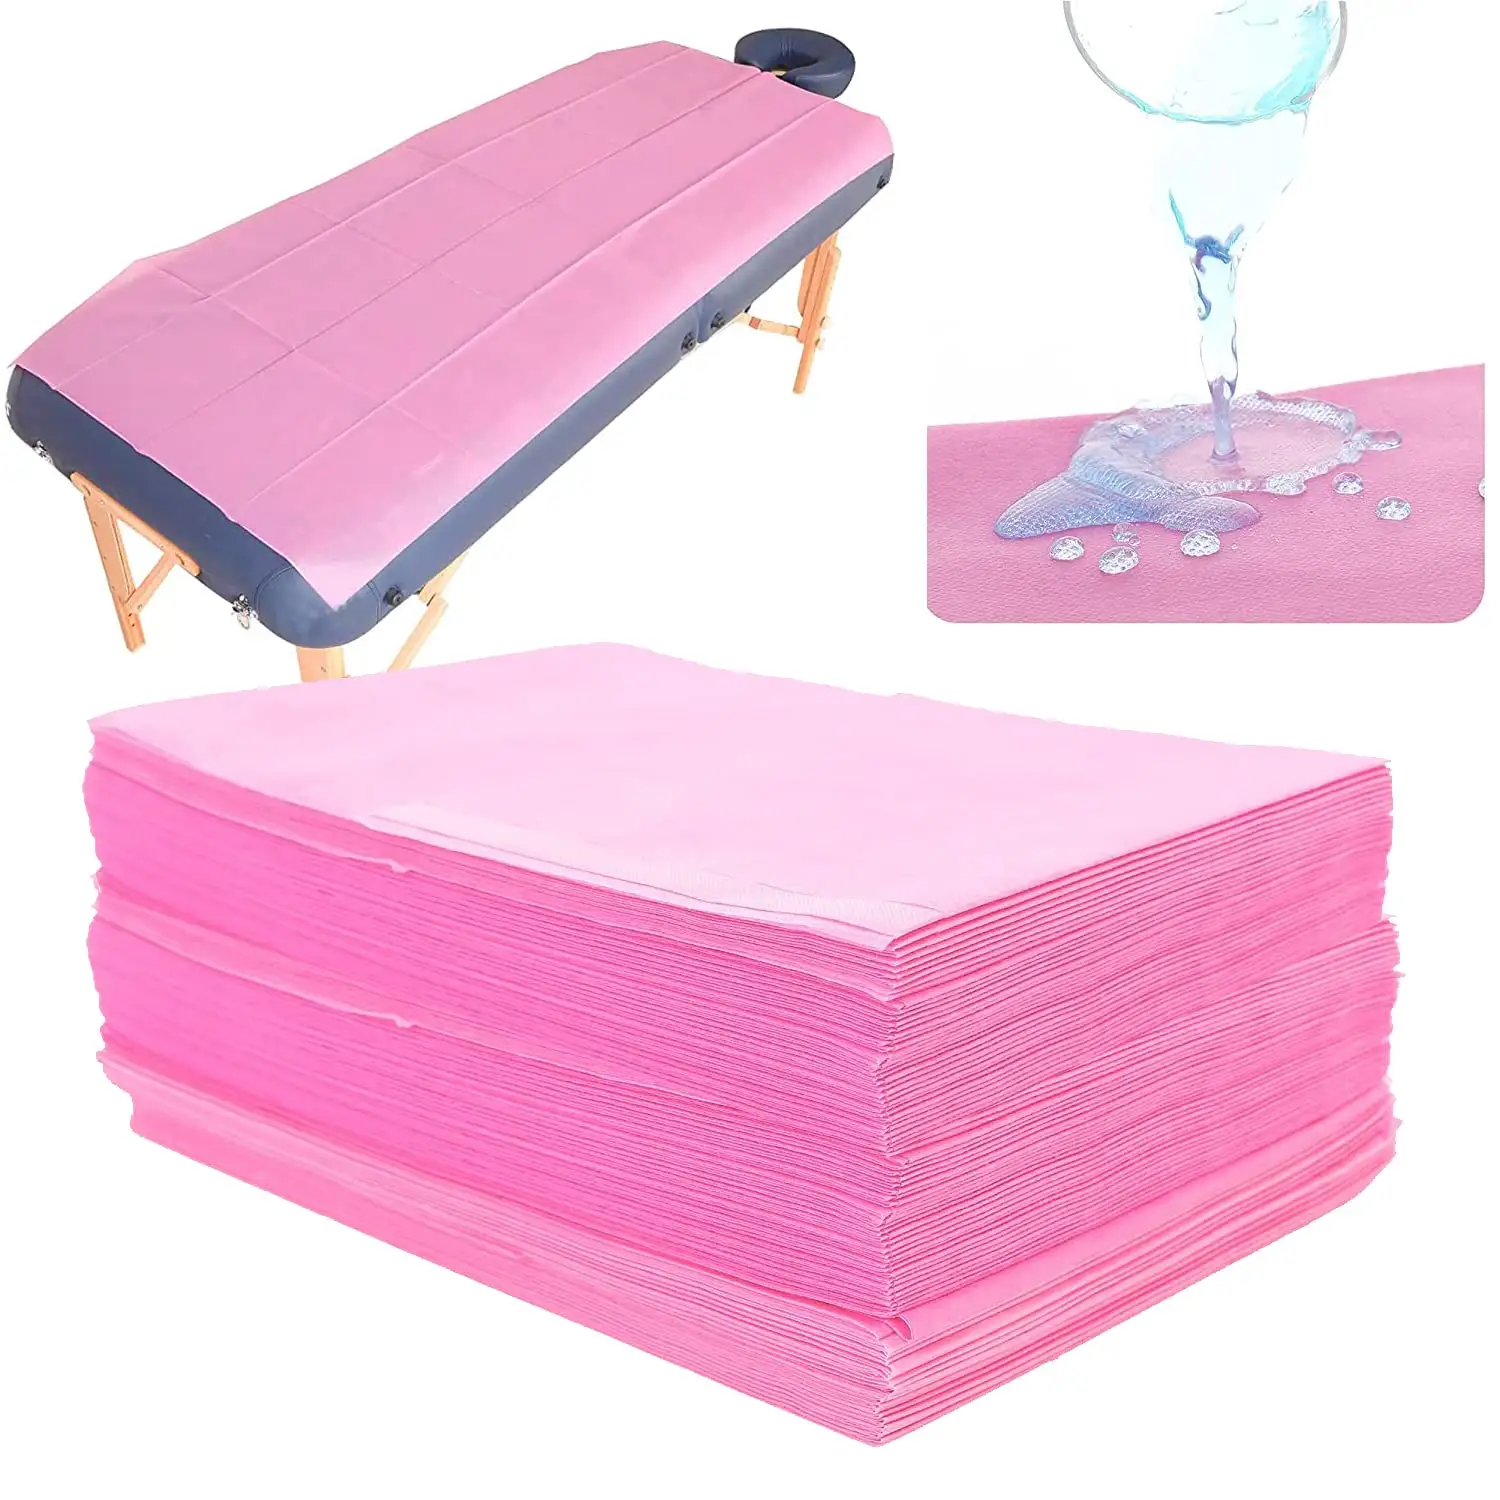 Disposable Massage Bed Sheets 71 x 31 Inches Lash Bed Sheets Non Woven Fabric Table Sheets SPA Waterproof Oil-proof Bed Cover